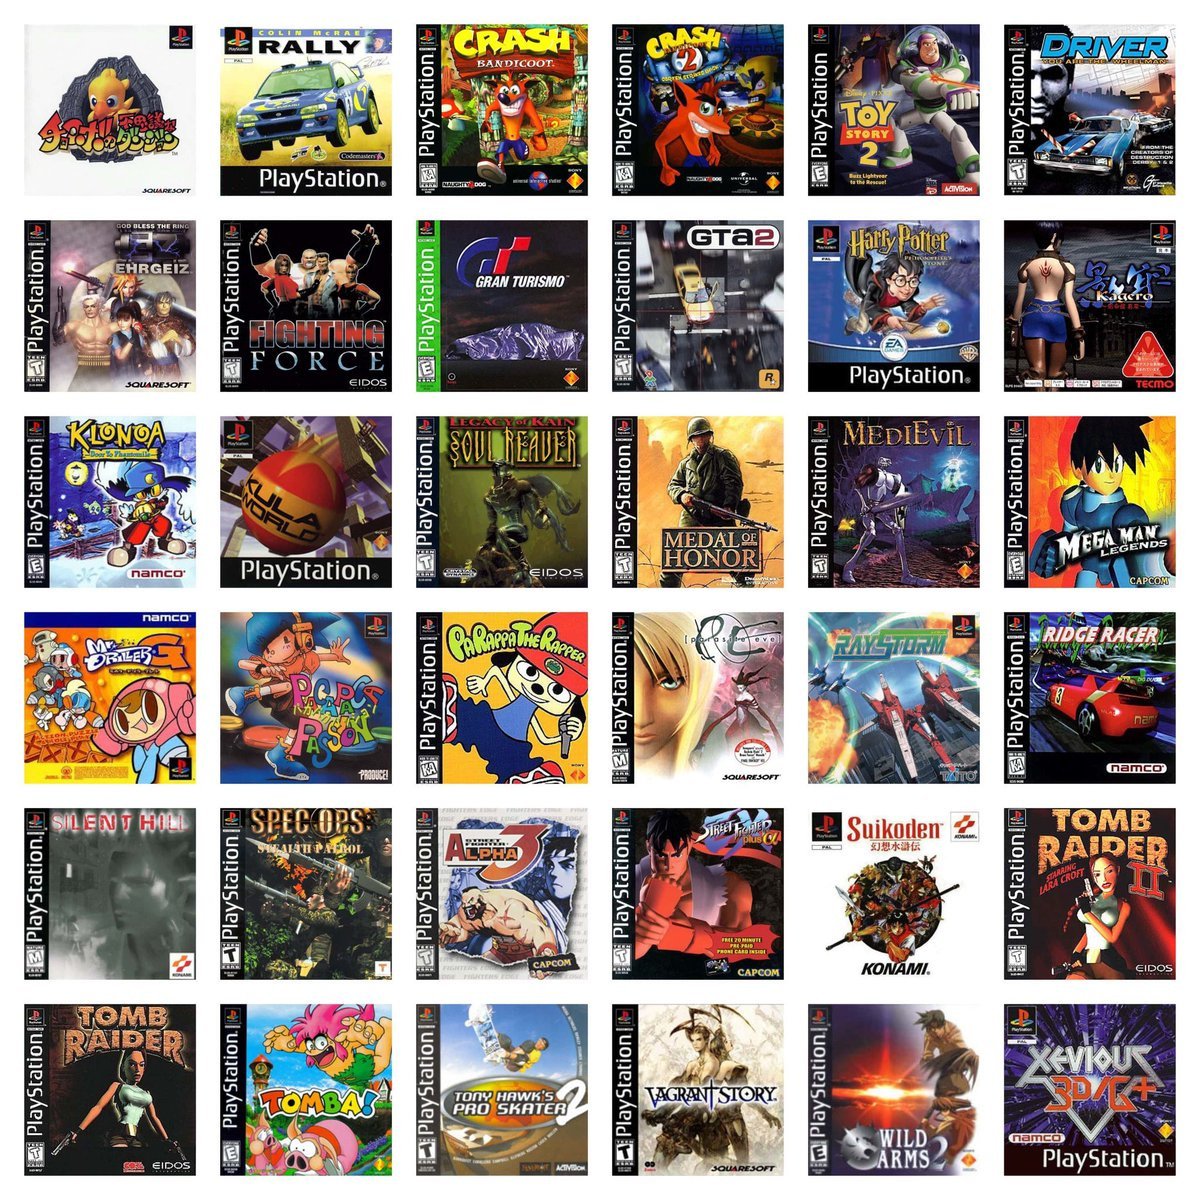 There Are References to More Great Games in the PS Classic